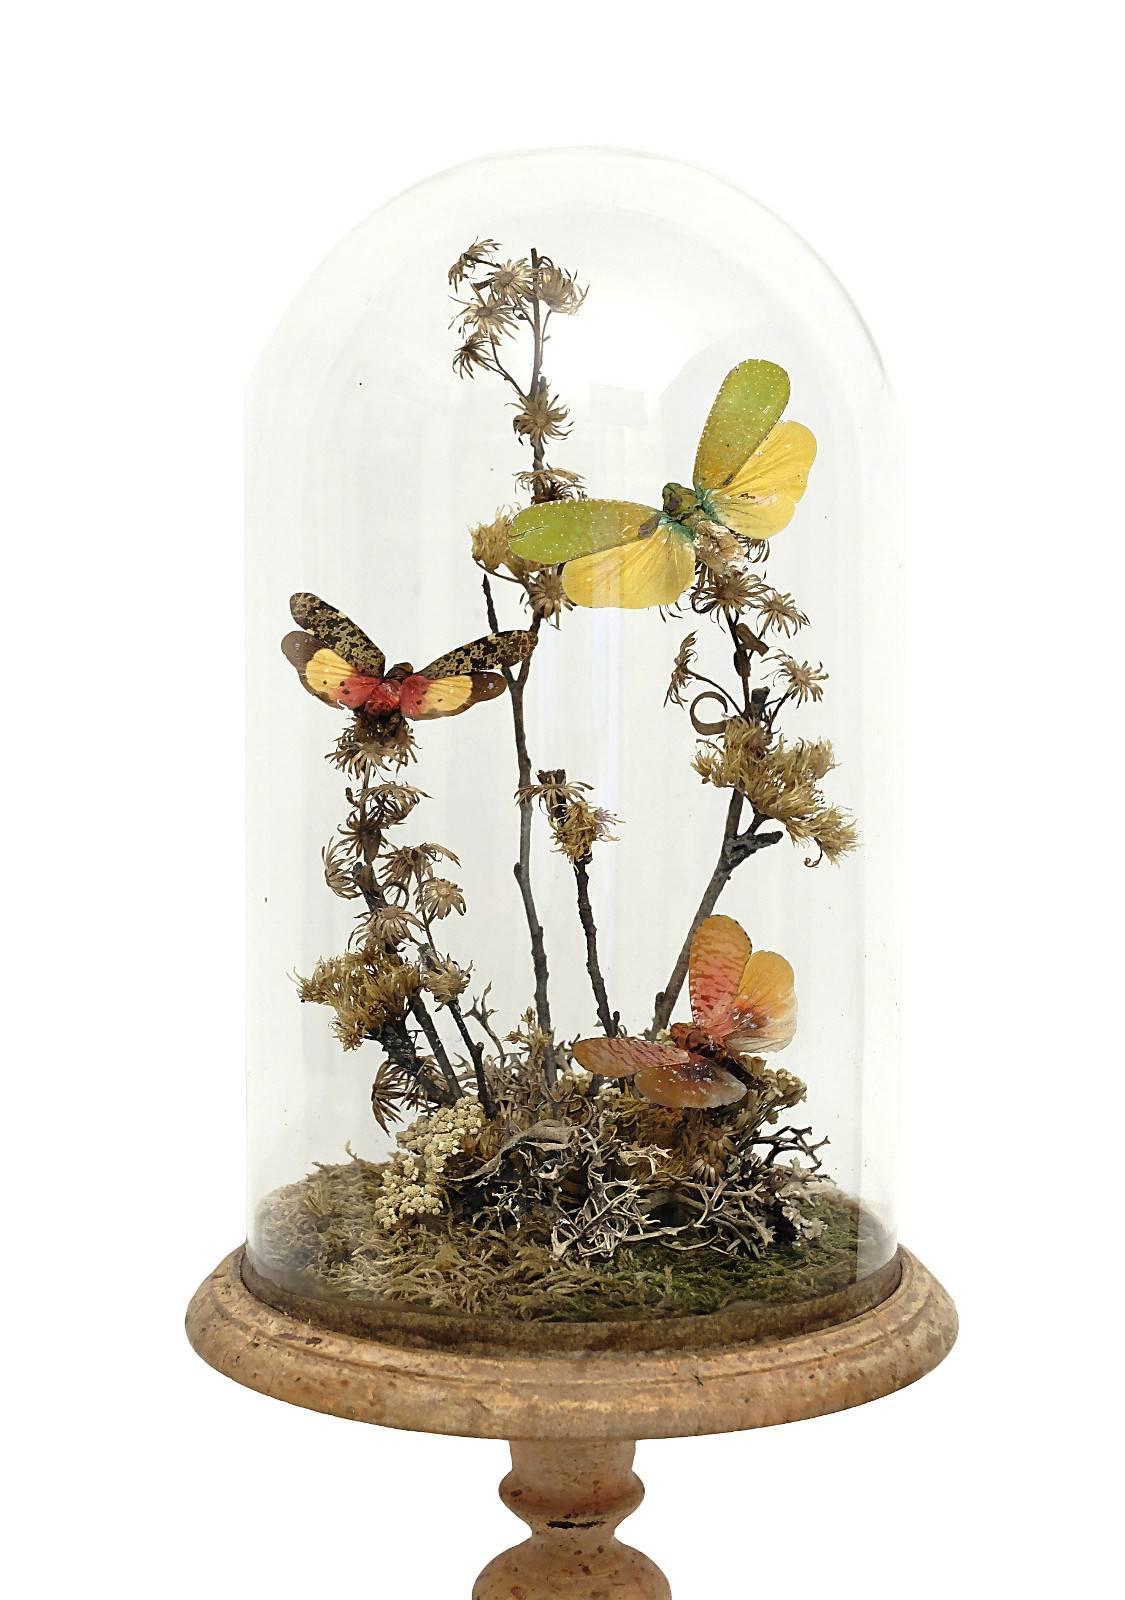 Natural Wunderkammer Diorama with Butterflies and Flowers 2